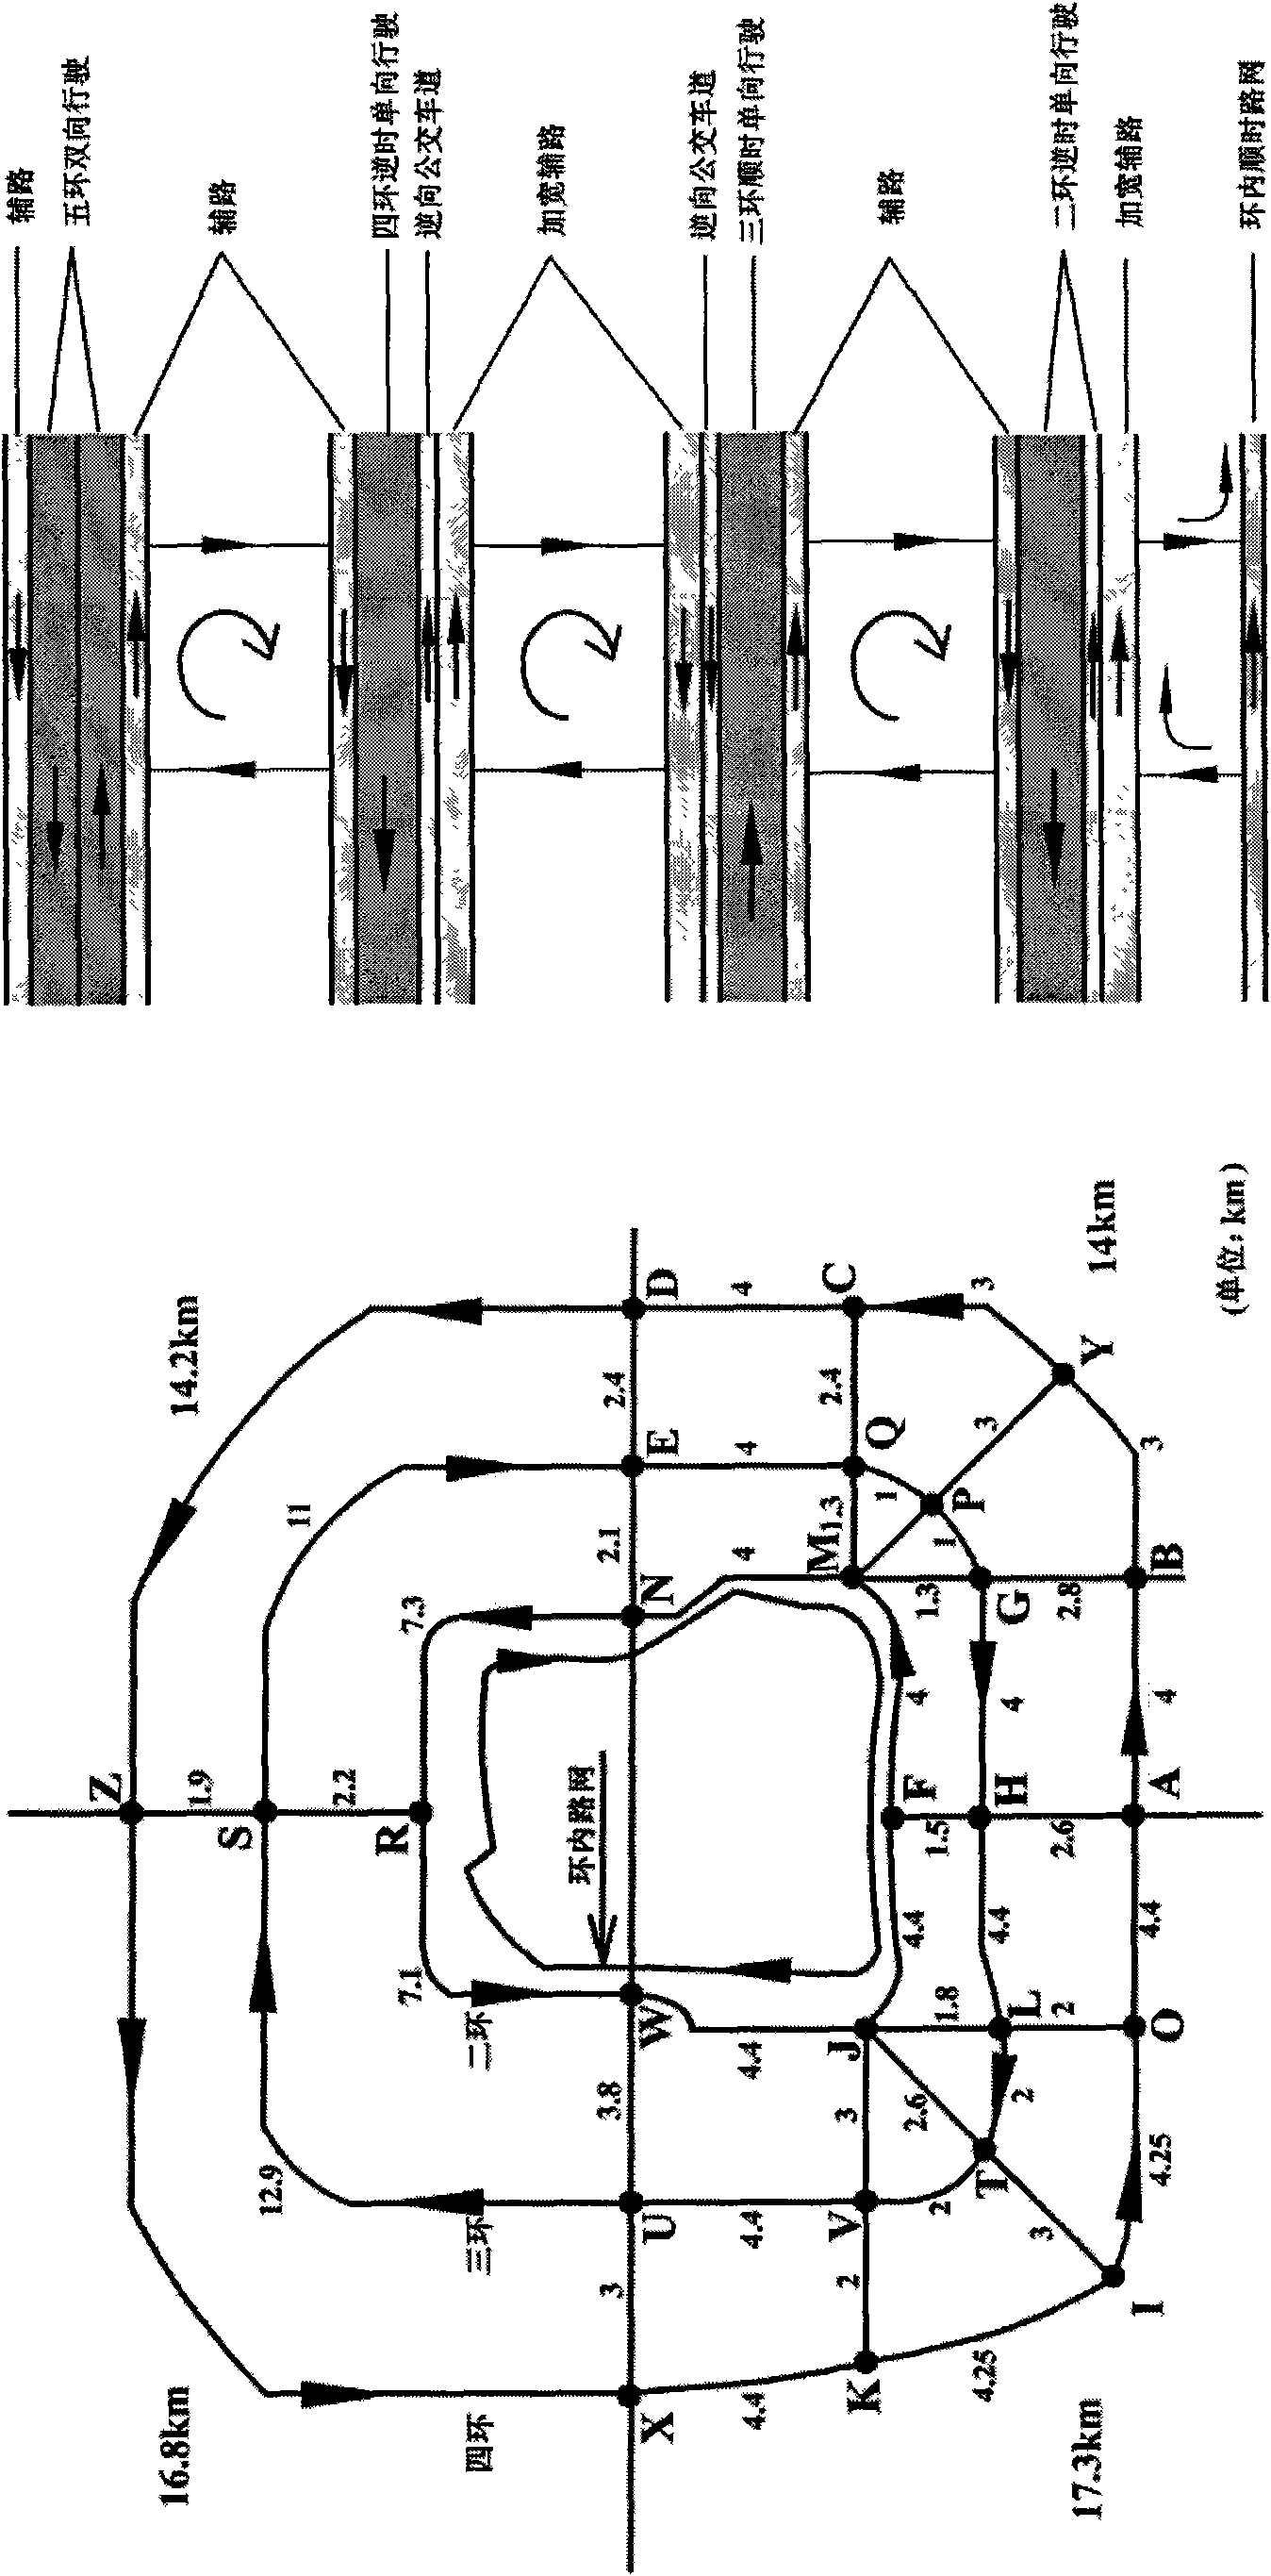 Design of urban loop roads taking one-way traffic as main public traffic and reverse driving as auxiliary traffic